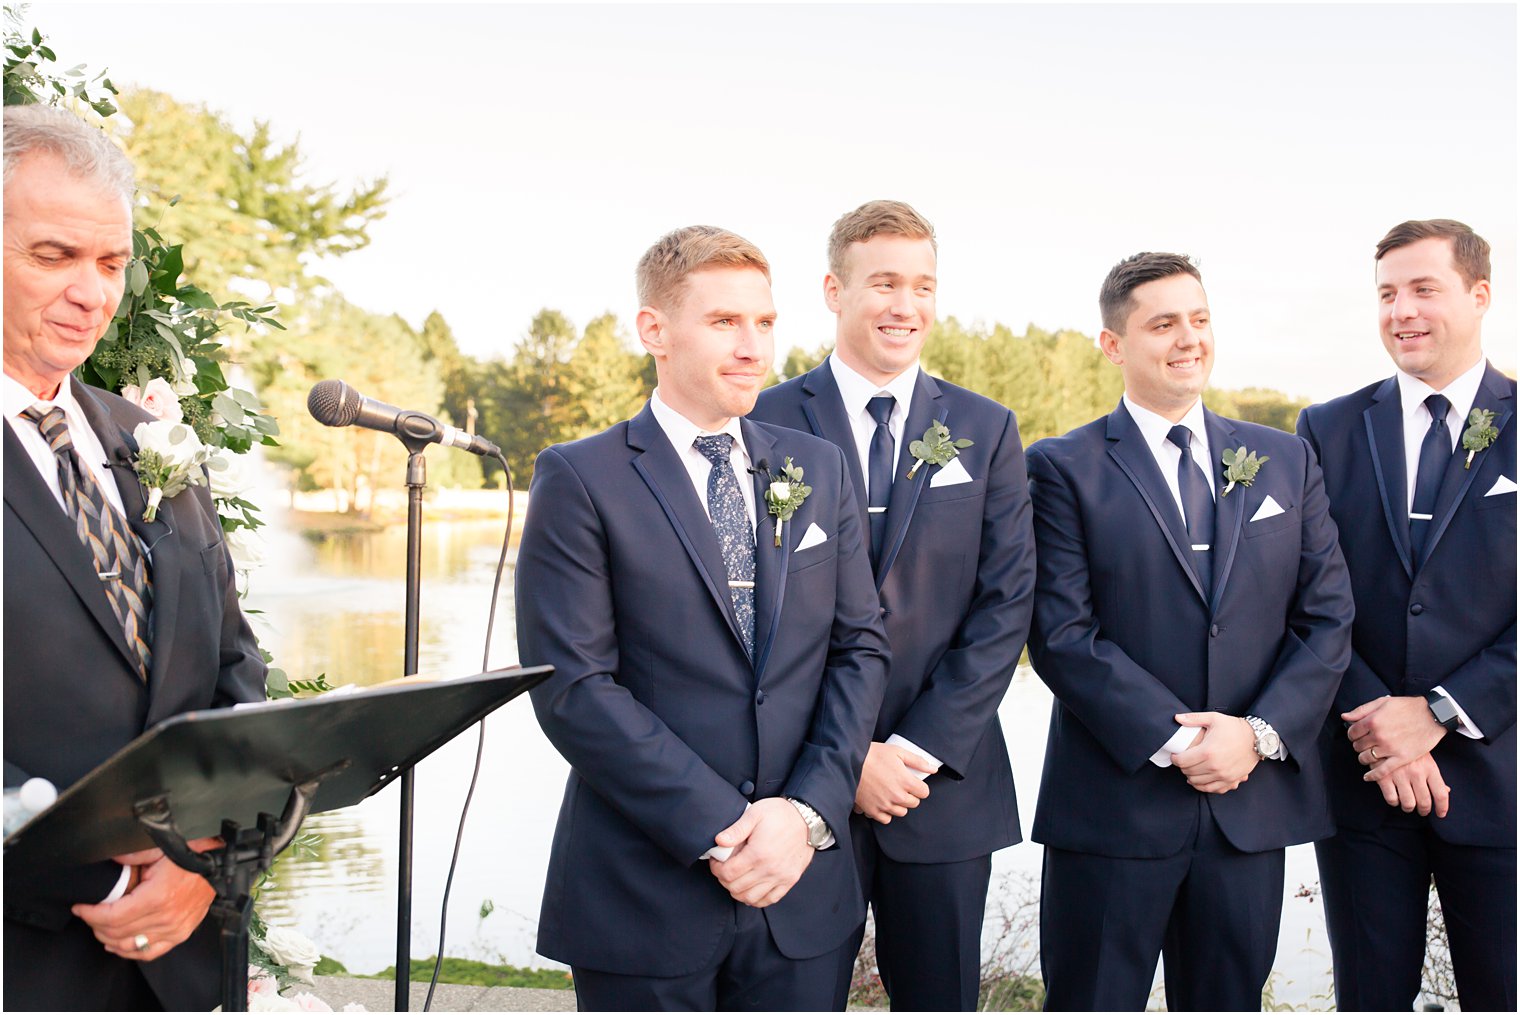 outdoor wedding ceremony in New Jersey with Idalia Photography